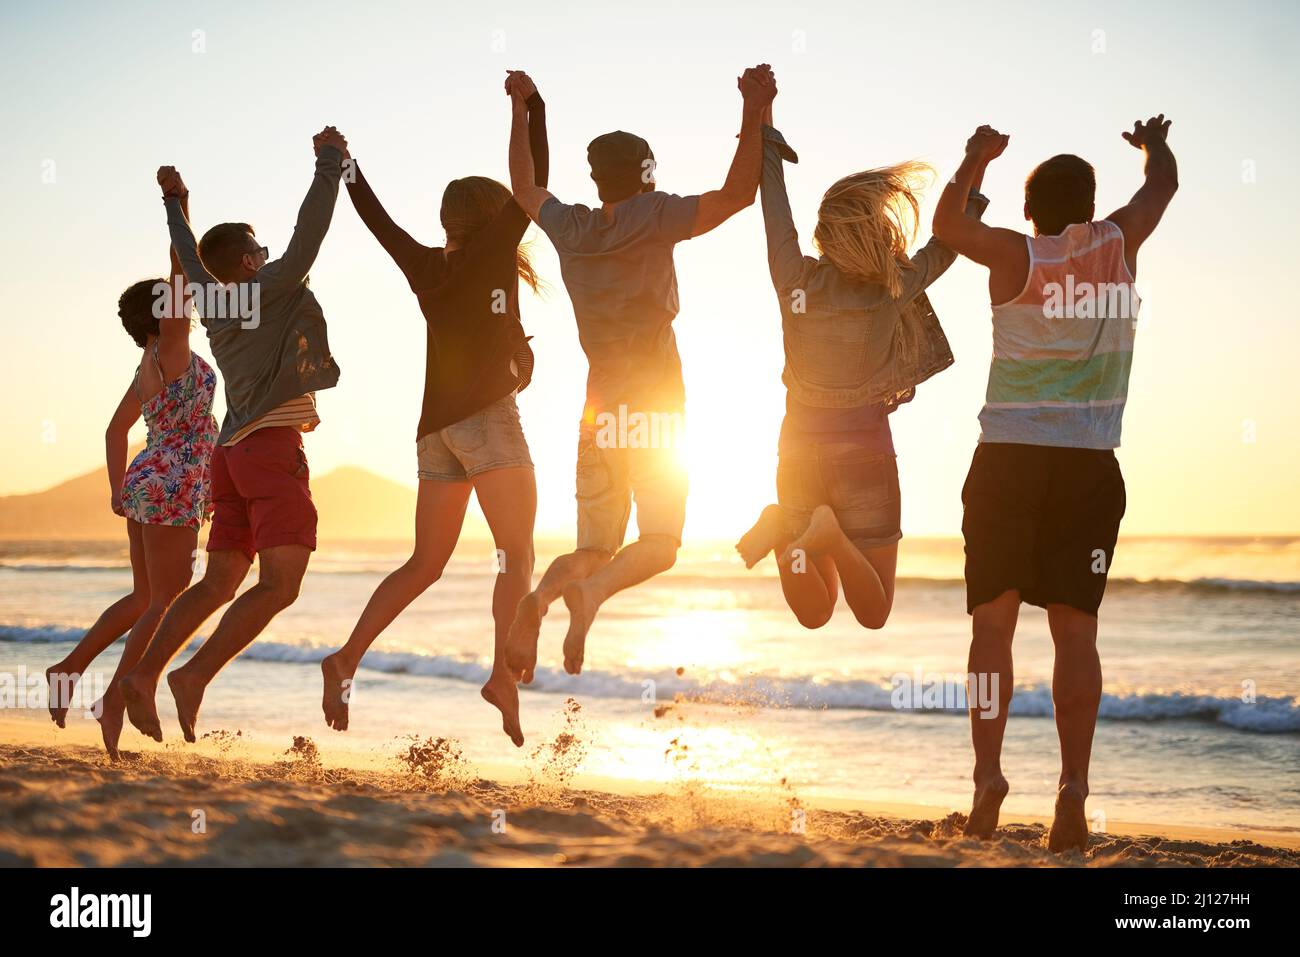 United we fly. Rearview shot of a group of young friends jumping into the air while holding hands at the beach. Stock Photo